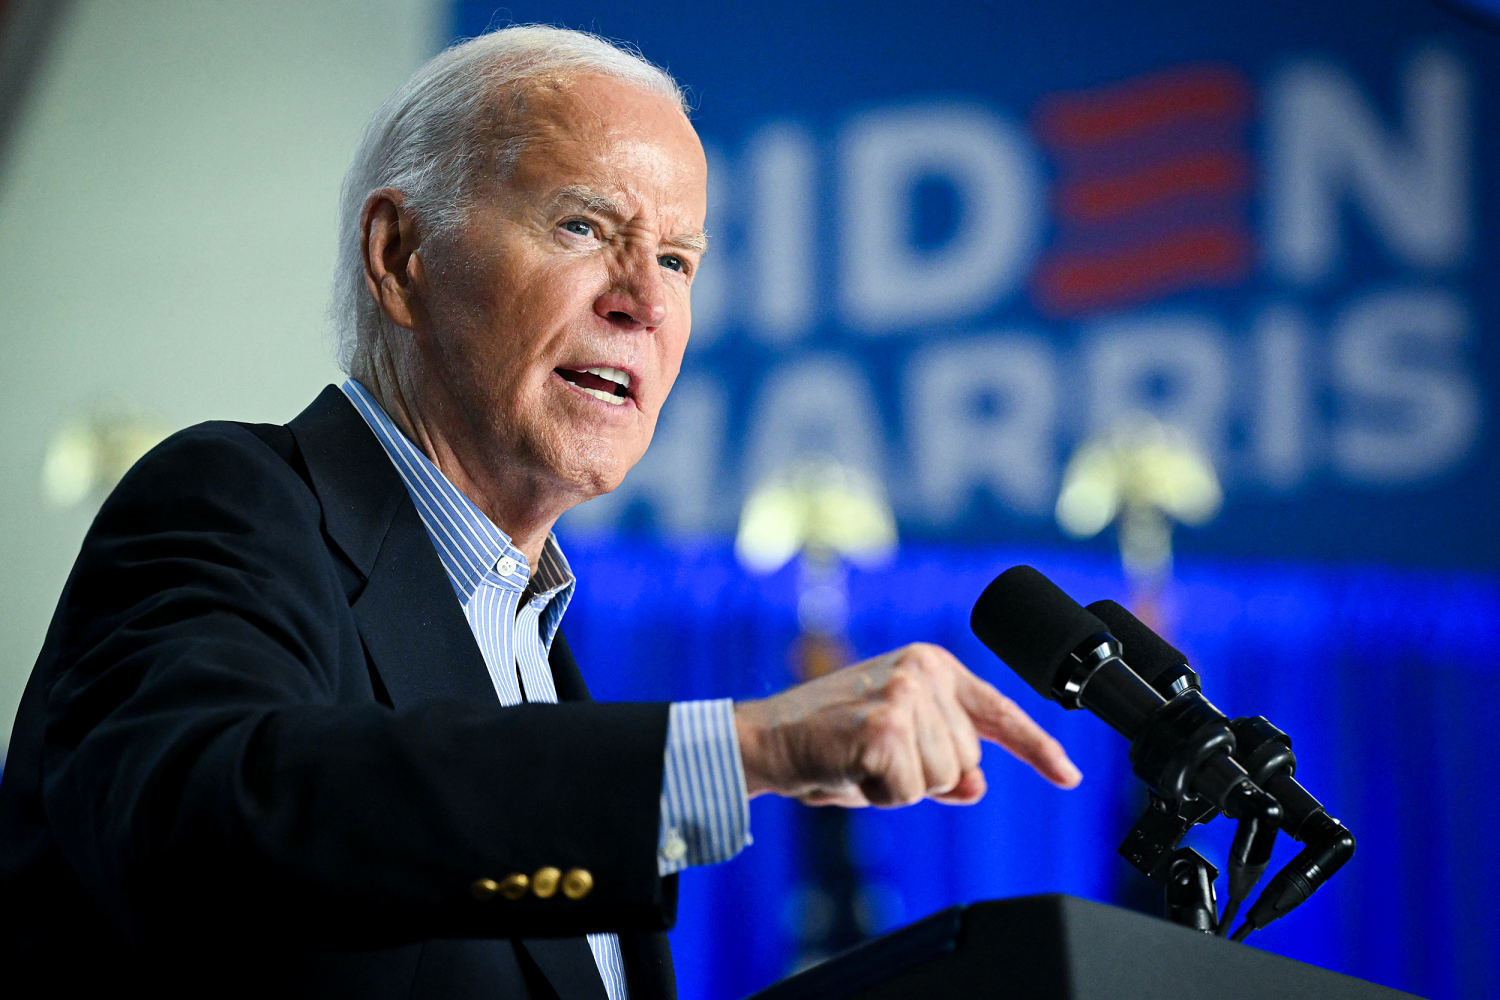 Biden rode the perception of electability to victory in 2020. But now it may be his undoing.